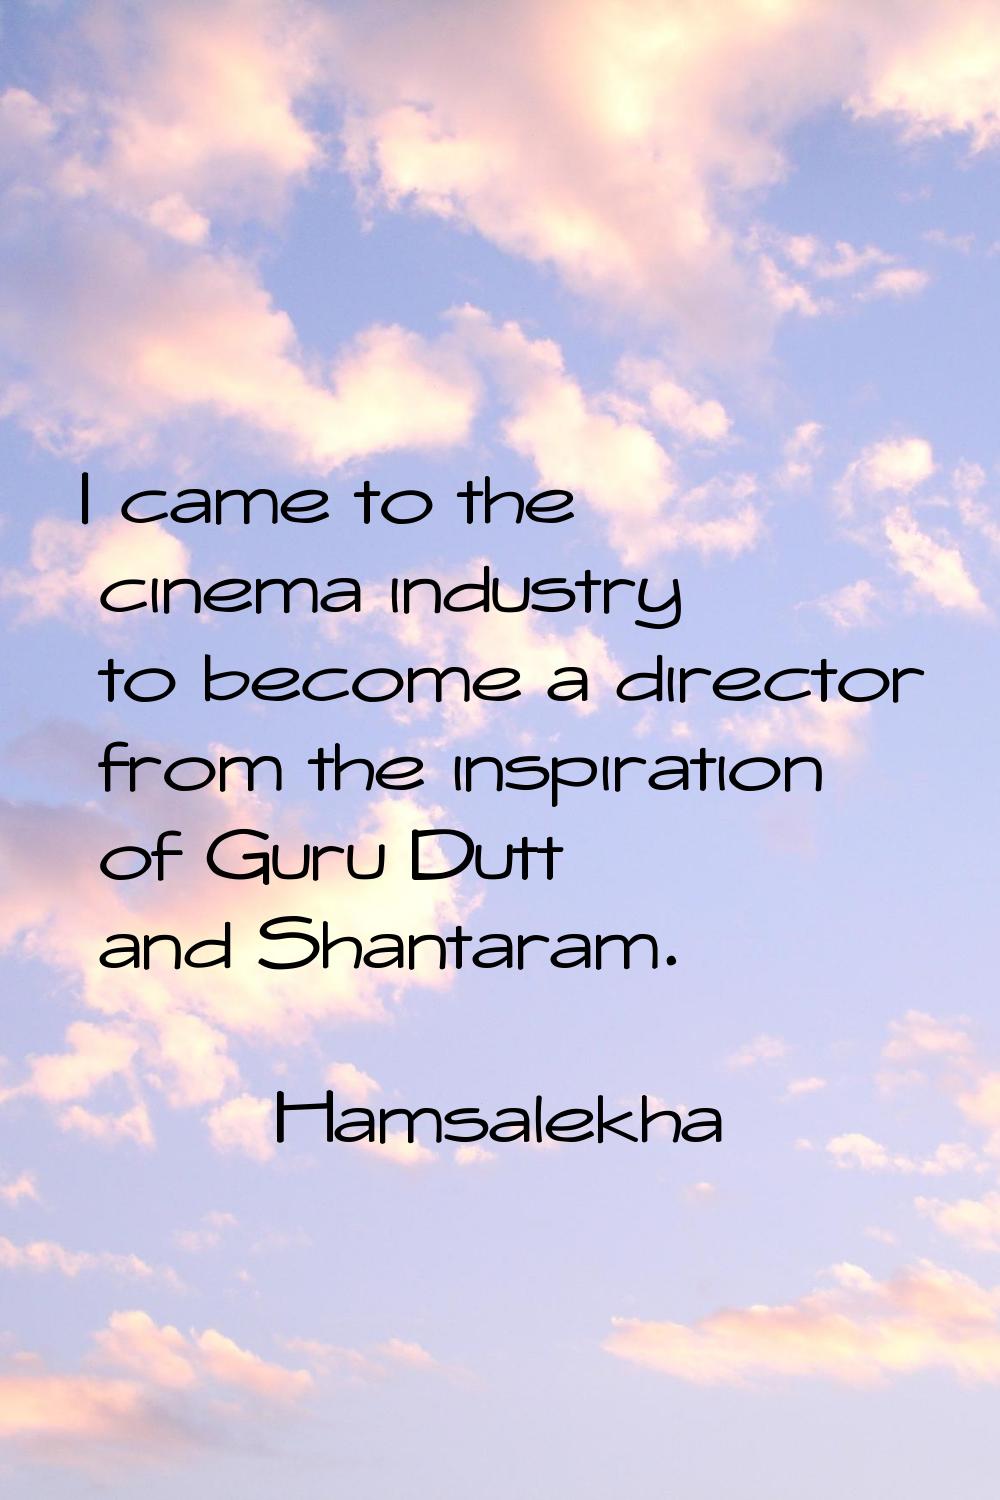 I came to the cinema industry to become a director from the inspiration of Guru Dutt and Shantaram.